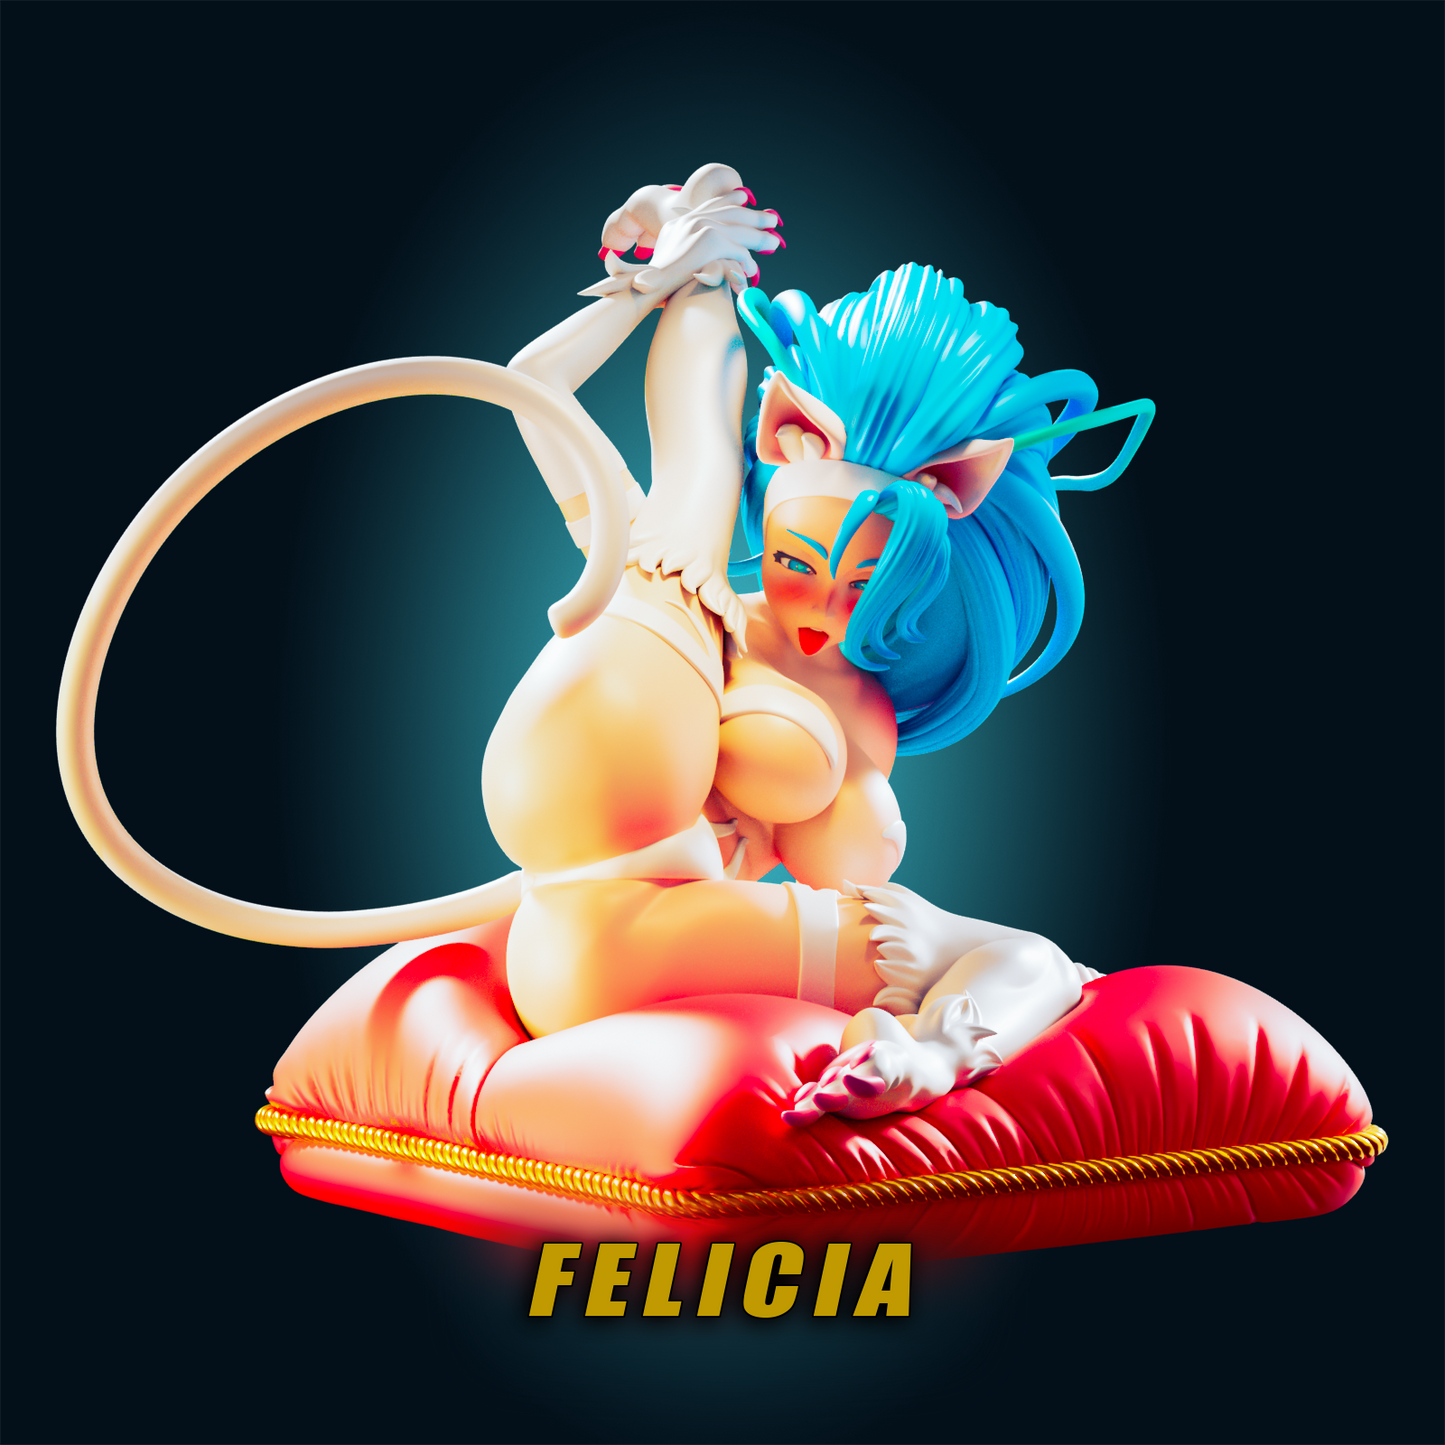 Felicia from Darkstalkers by Capcom Officer Rhu Fan creation (ADULT  Including FUTA editions now available.) Model Kit for painting and collecting.